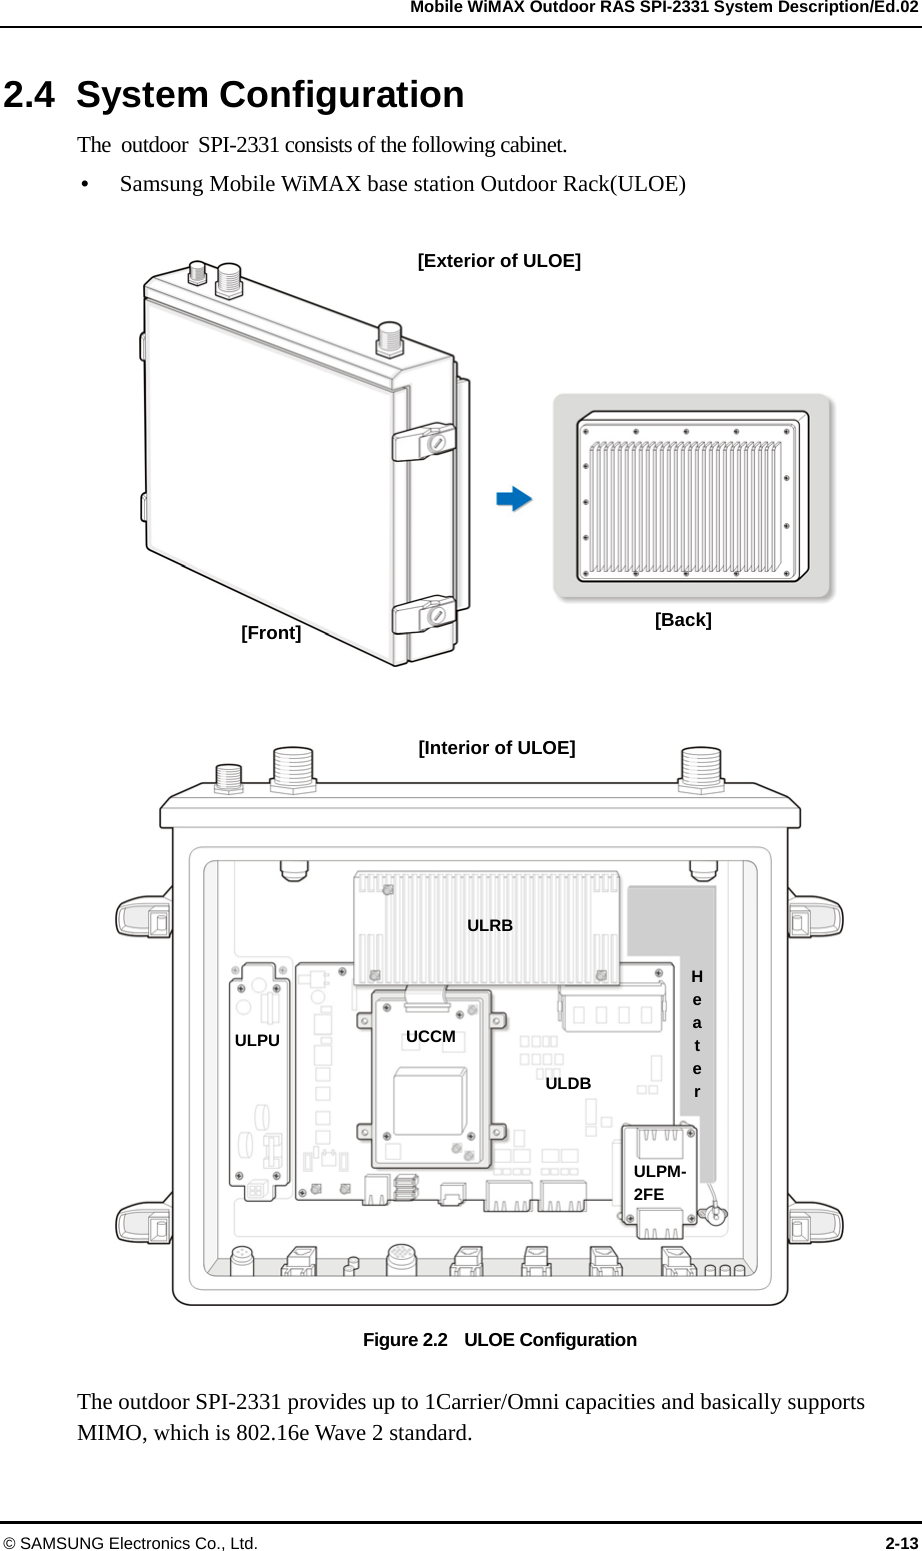   Mobile WiMAX Outdoor RAS SPI-2331 System Description/Ed.02 © SAMSUNG Electronics Co., Ltd.  2-13 2.4 System Configuration The  outdoor  SPI-2331 consists of the following cabinet.y Samsung Mobile WiMAX base station Outdoor Rack(ULOE)   Figure 2.2    ULOE Configuration  The outdoor SPI-2331 provides up to 1Carrier/Omni capacities and basically supports MIMO, which is 802.16e Wave 2 standard. [Exterior of ULOE] [Front]  [Back] ULRB H e a t e r ULPU  UCCM ULDB ULPM-2FE [Interior of ULOE] 